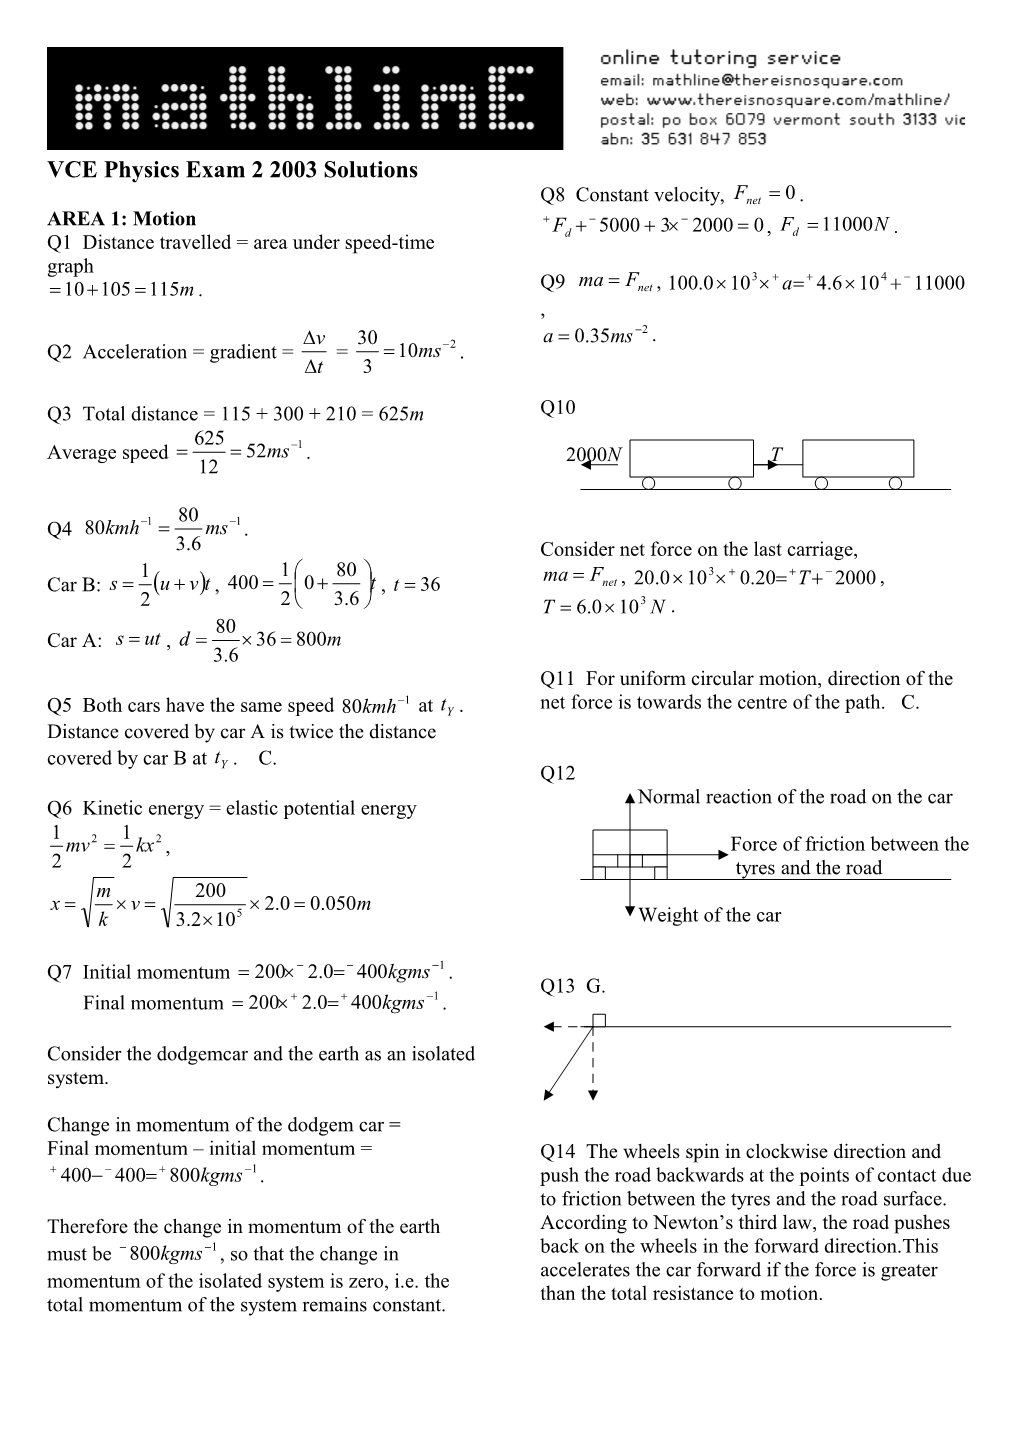 VCE Physics Exam 2 2003 Solutions